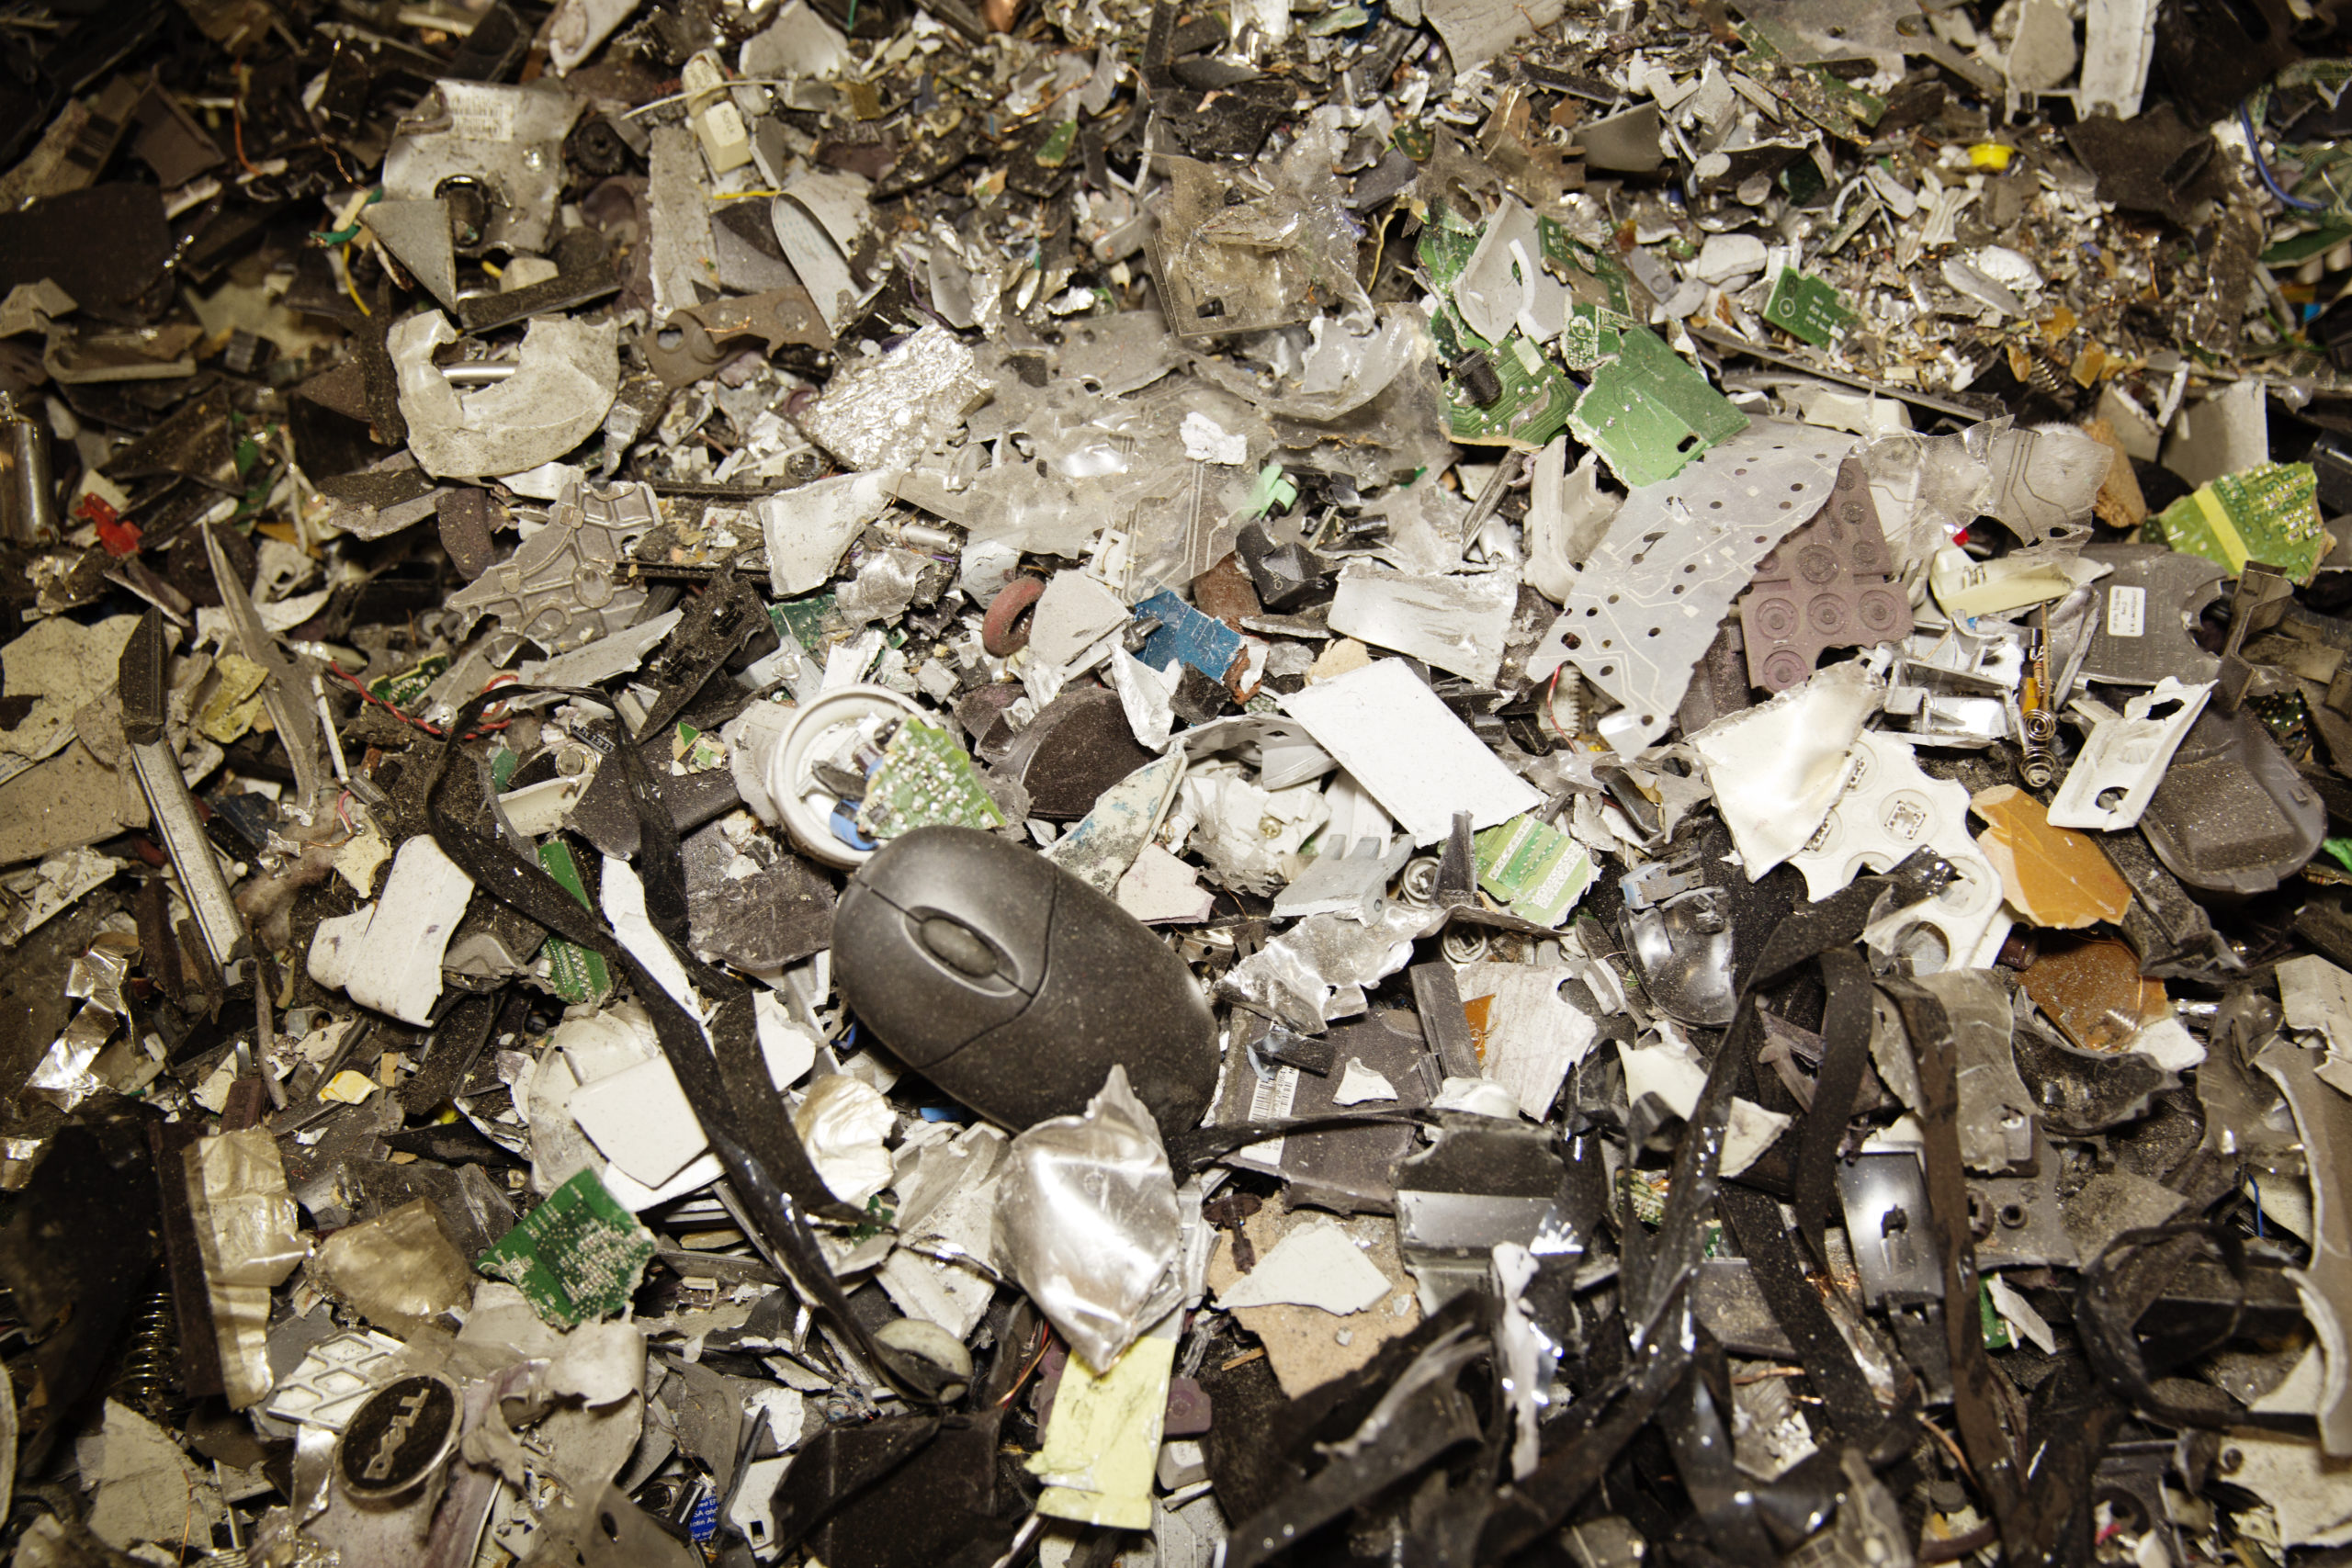 A discarded mouse sits on top of a pile of trash and electronic components, illustrating the growing problem of electronic waste.